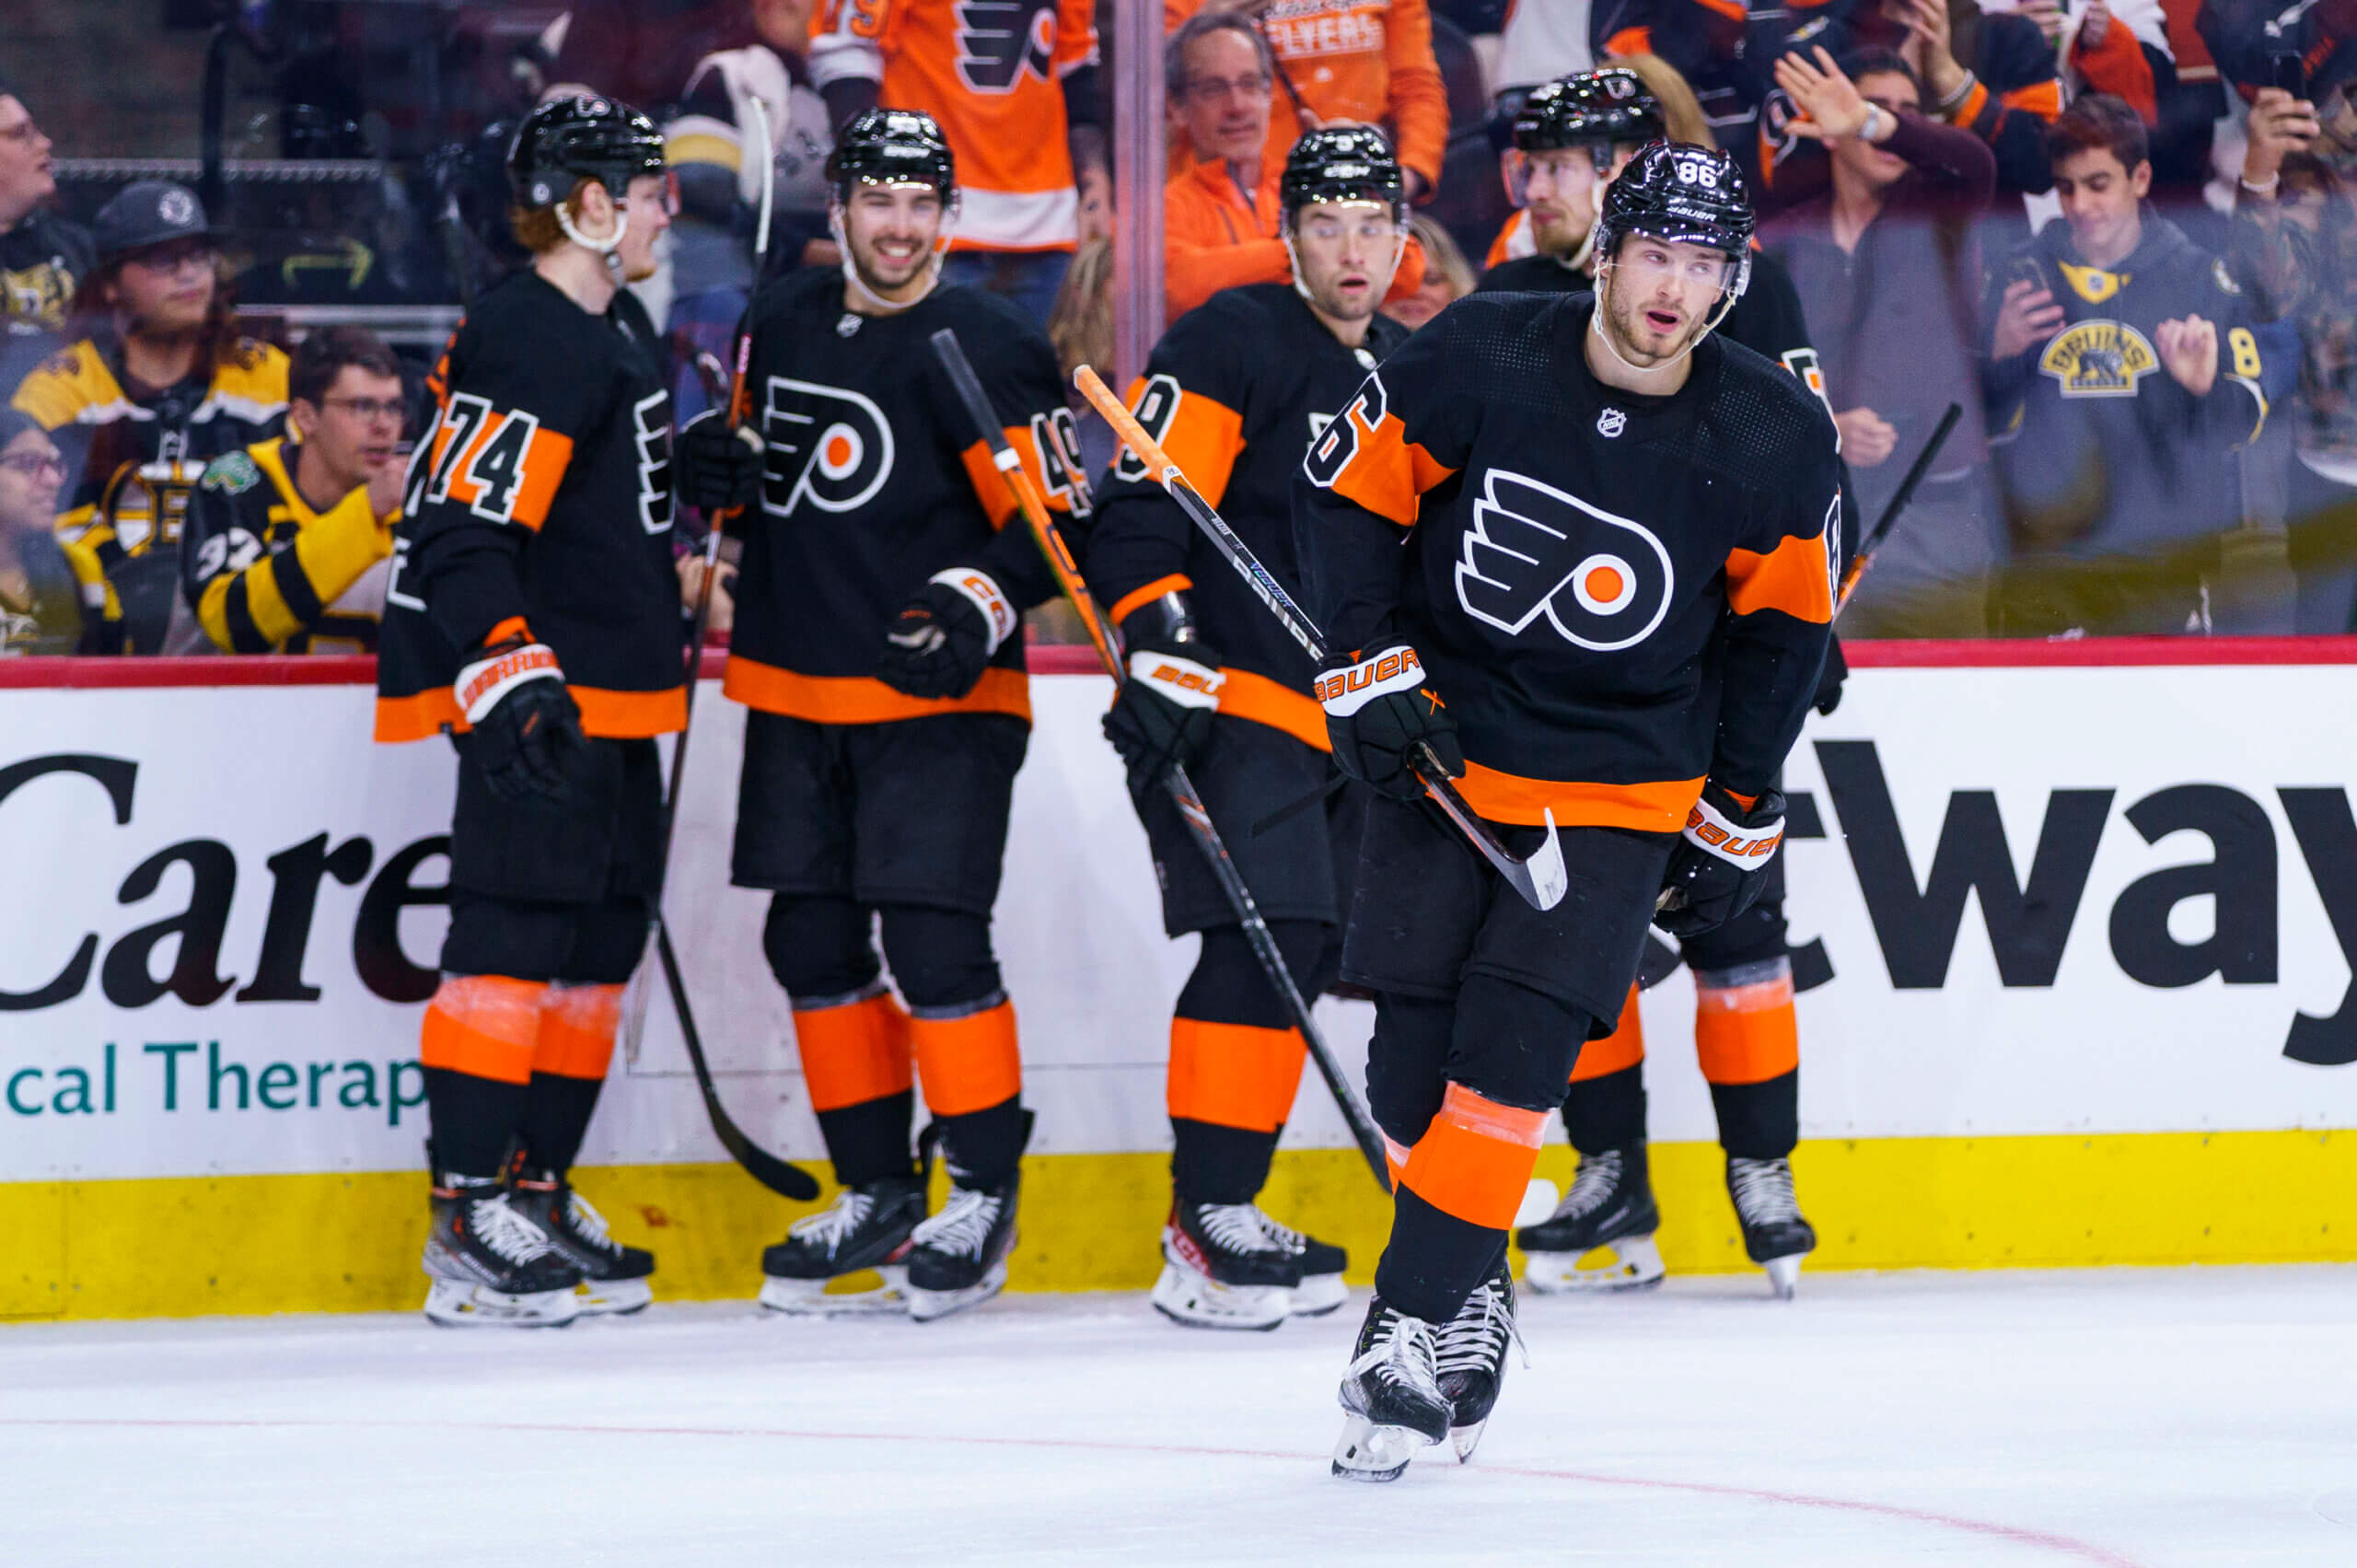 End of NHL Warmup Jerseys Starts With Philadelphia Flyers